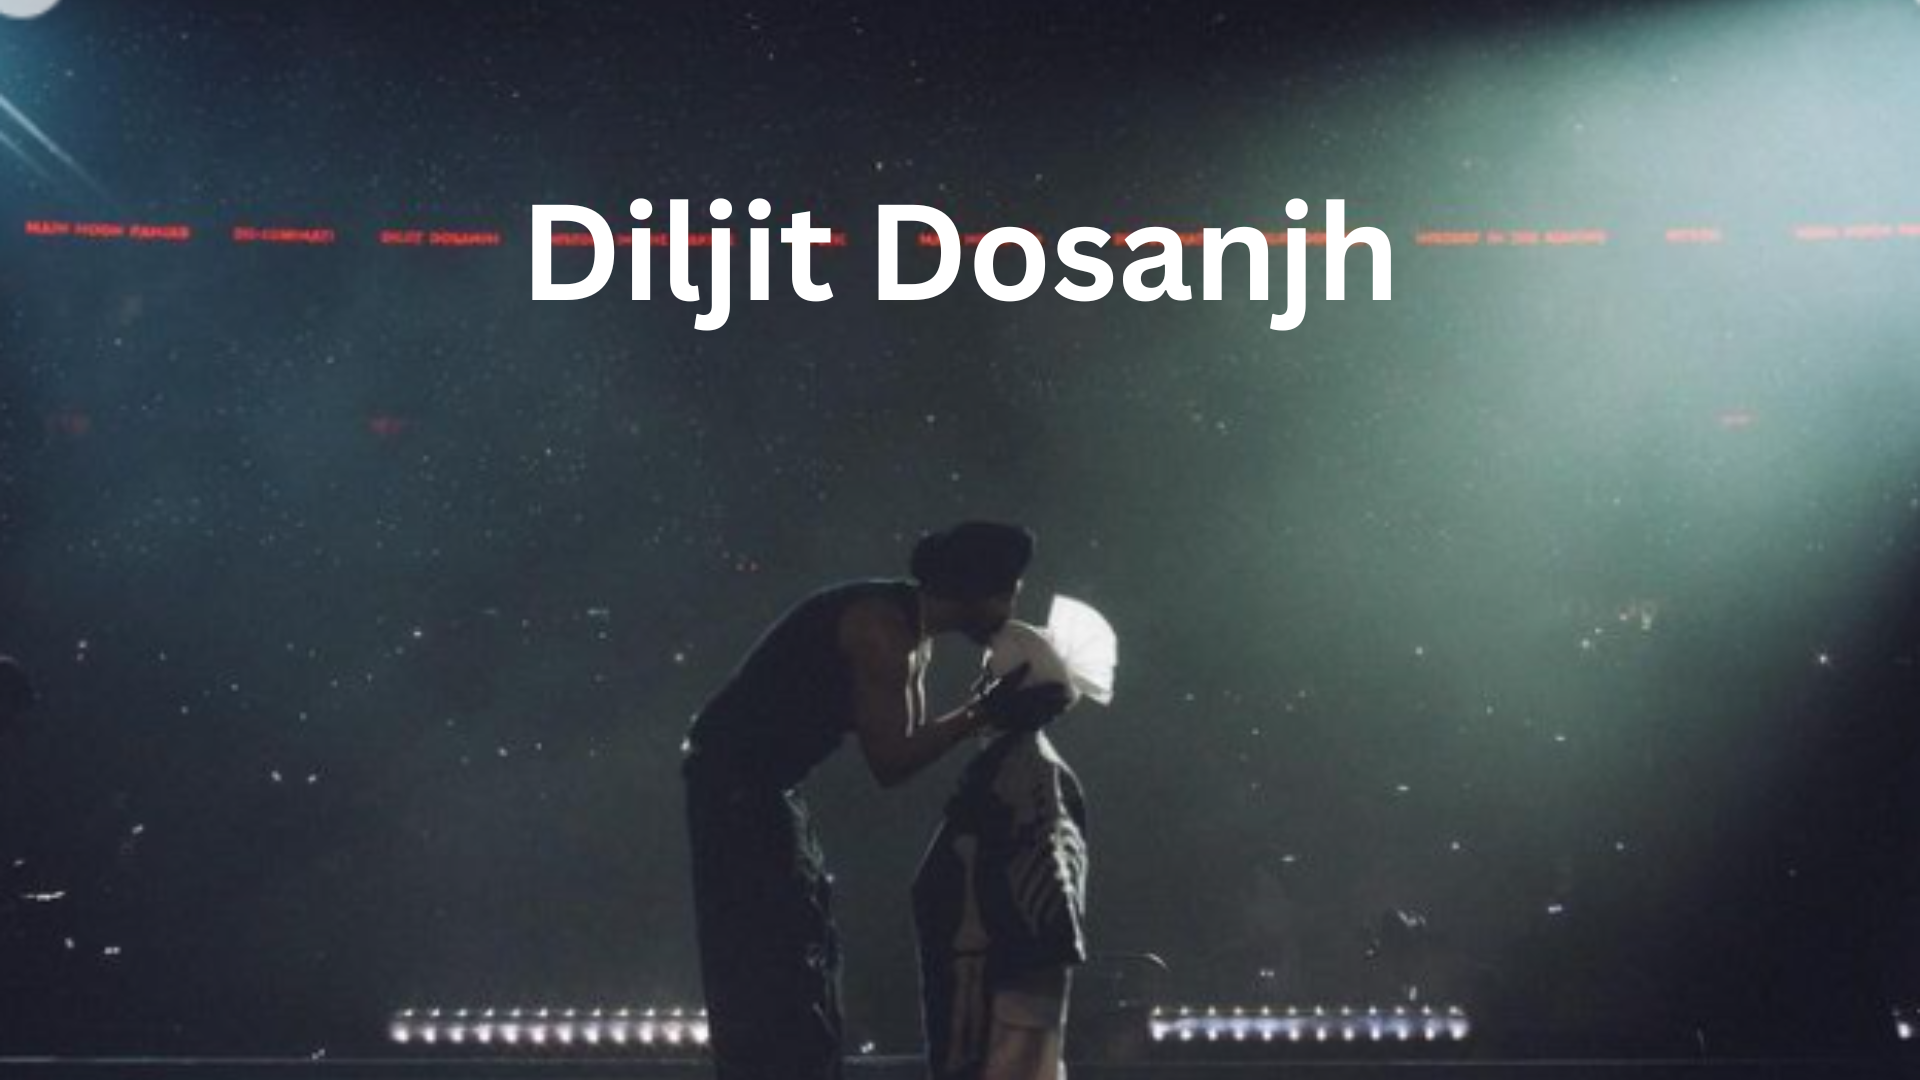 Diljit Dosanjh Makes History With Vancouver Concert